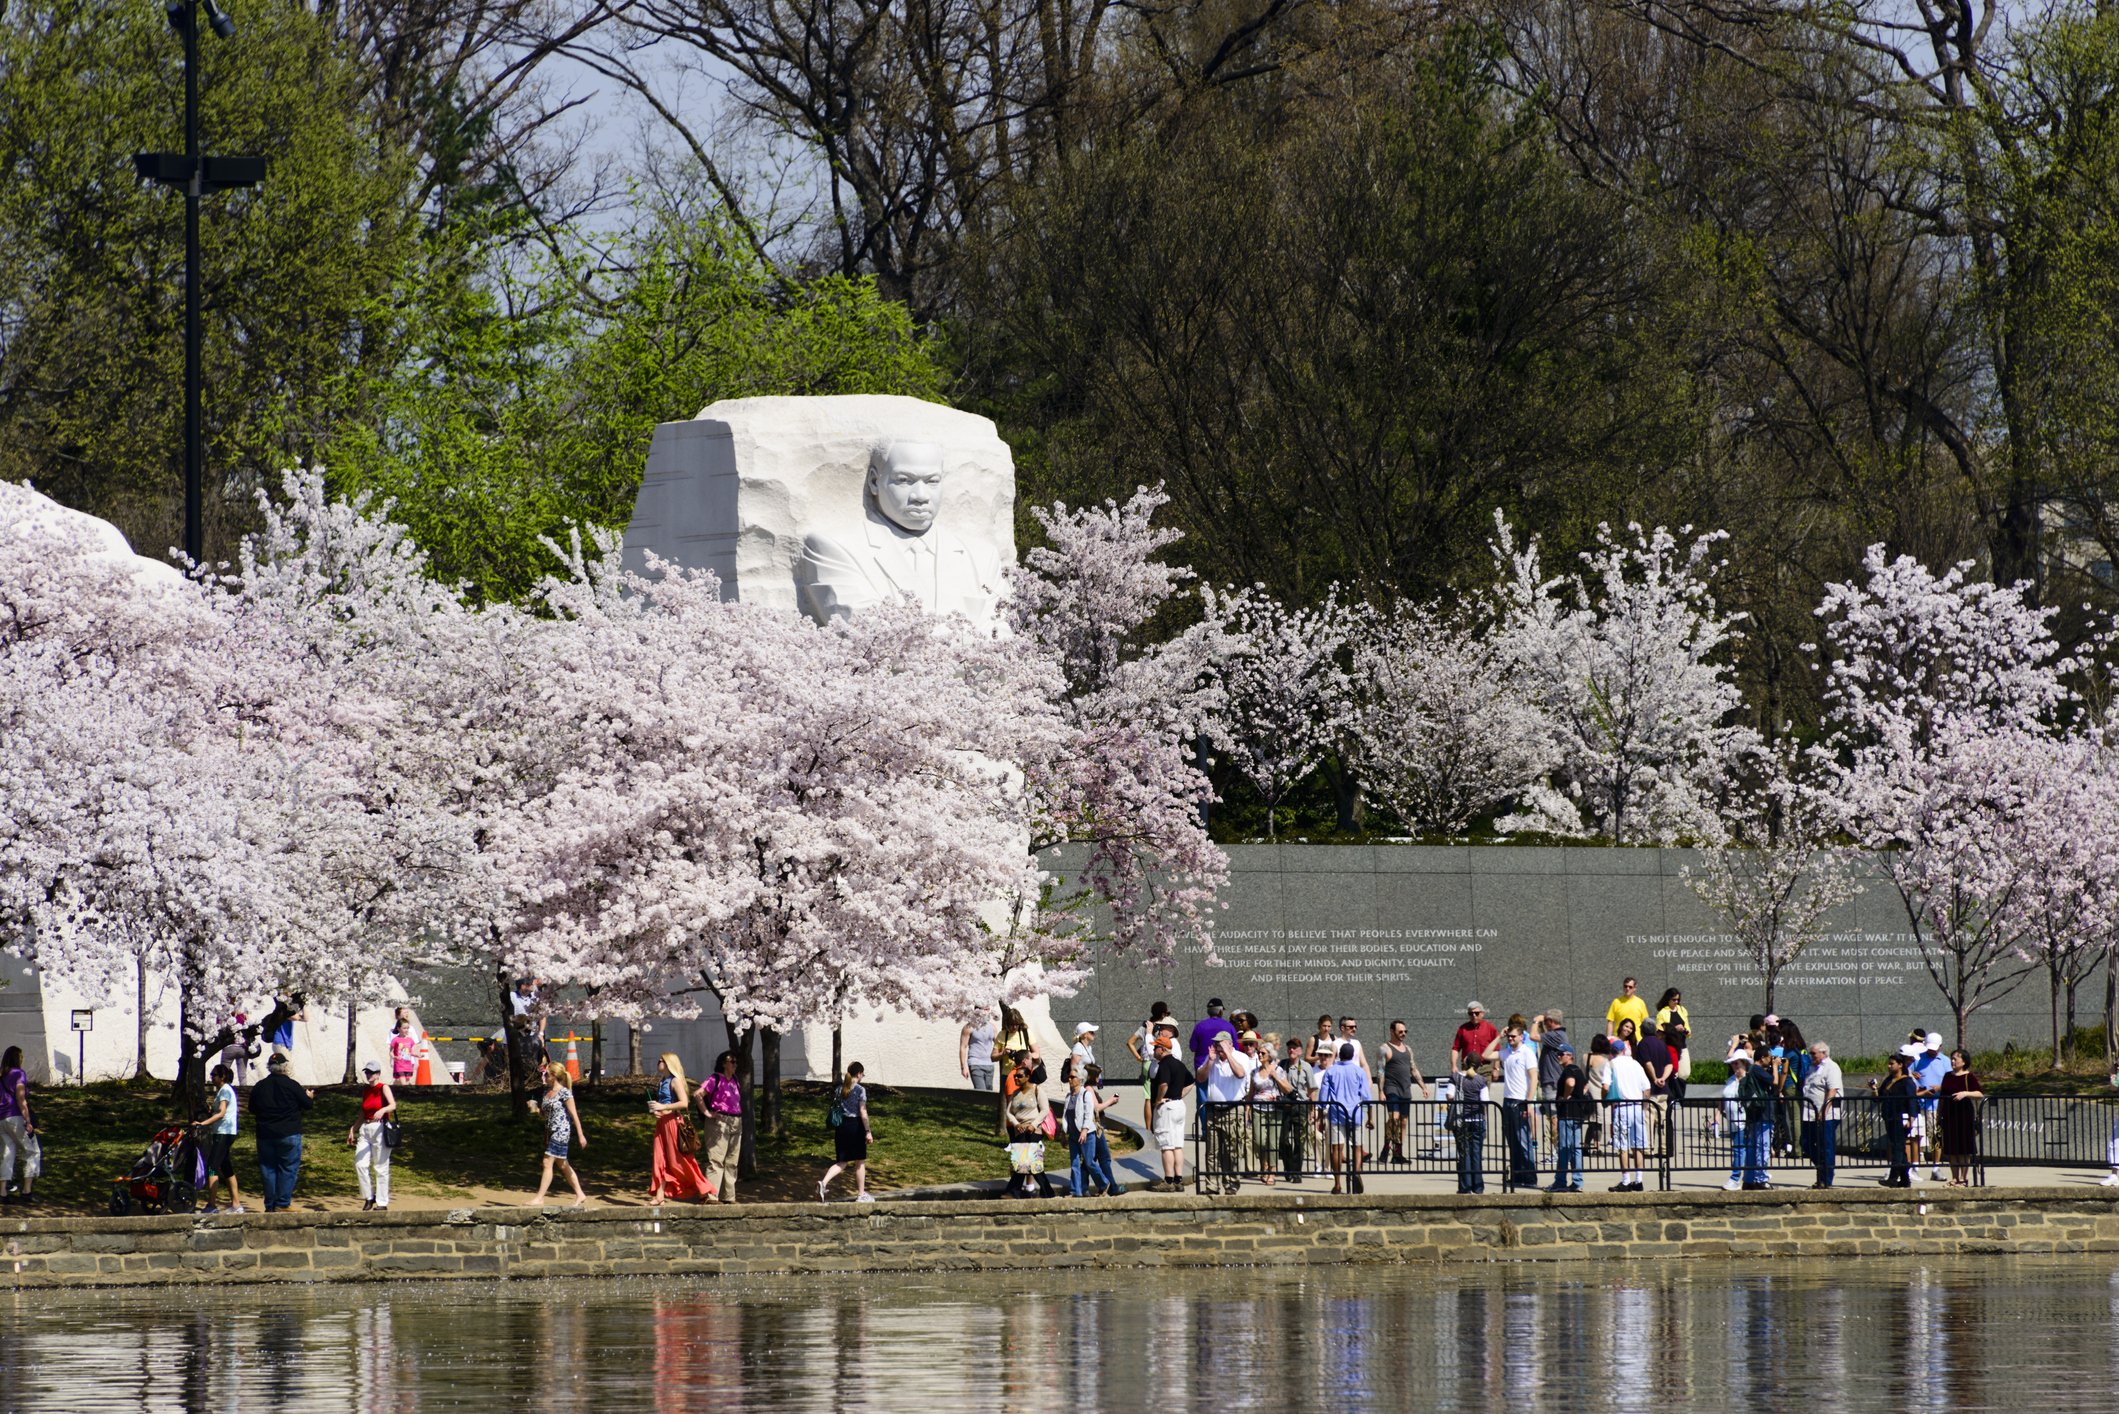 Getty Images stock photo of Martin Luther King Jr. memorial and tidal basin